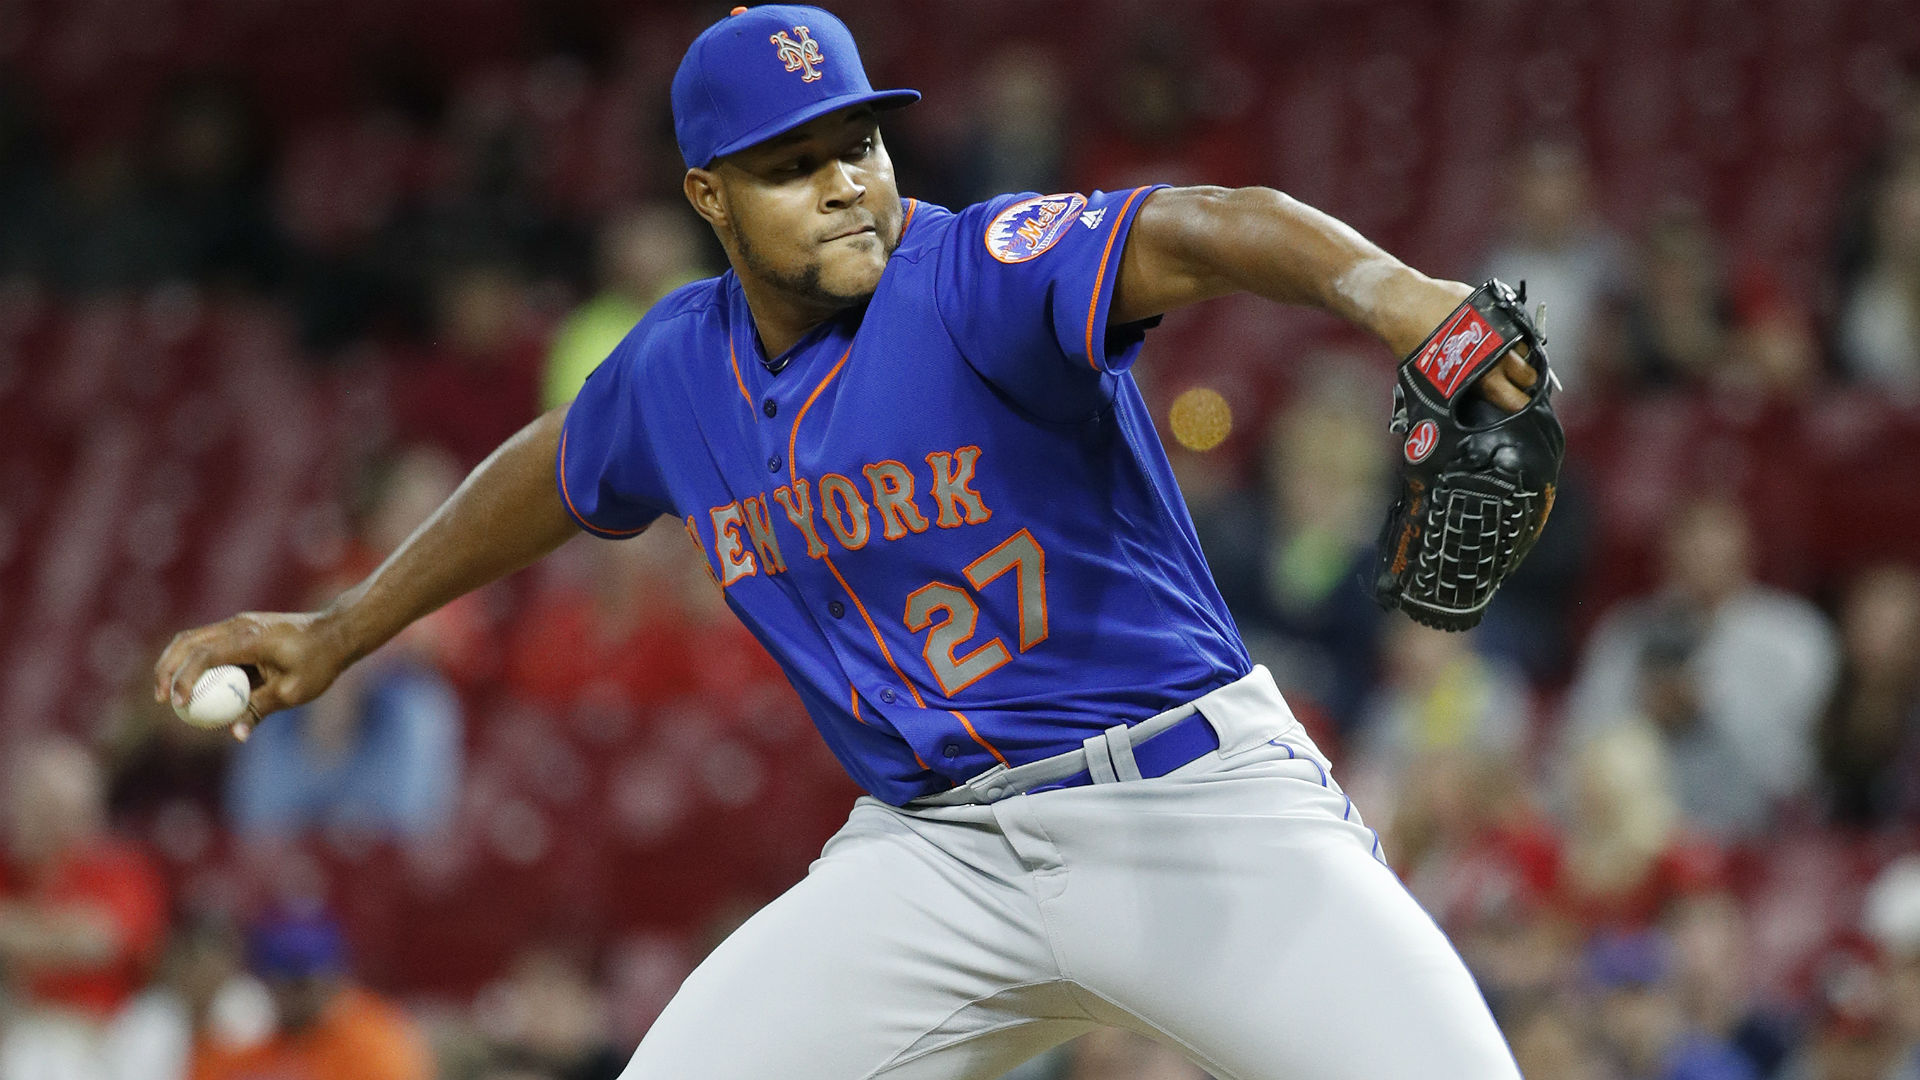 Familia, 29, is expected to serve in the setup role for new closer Edwin Diaz.